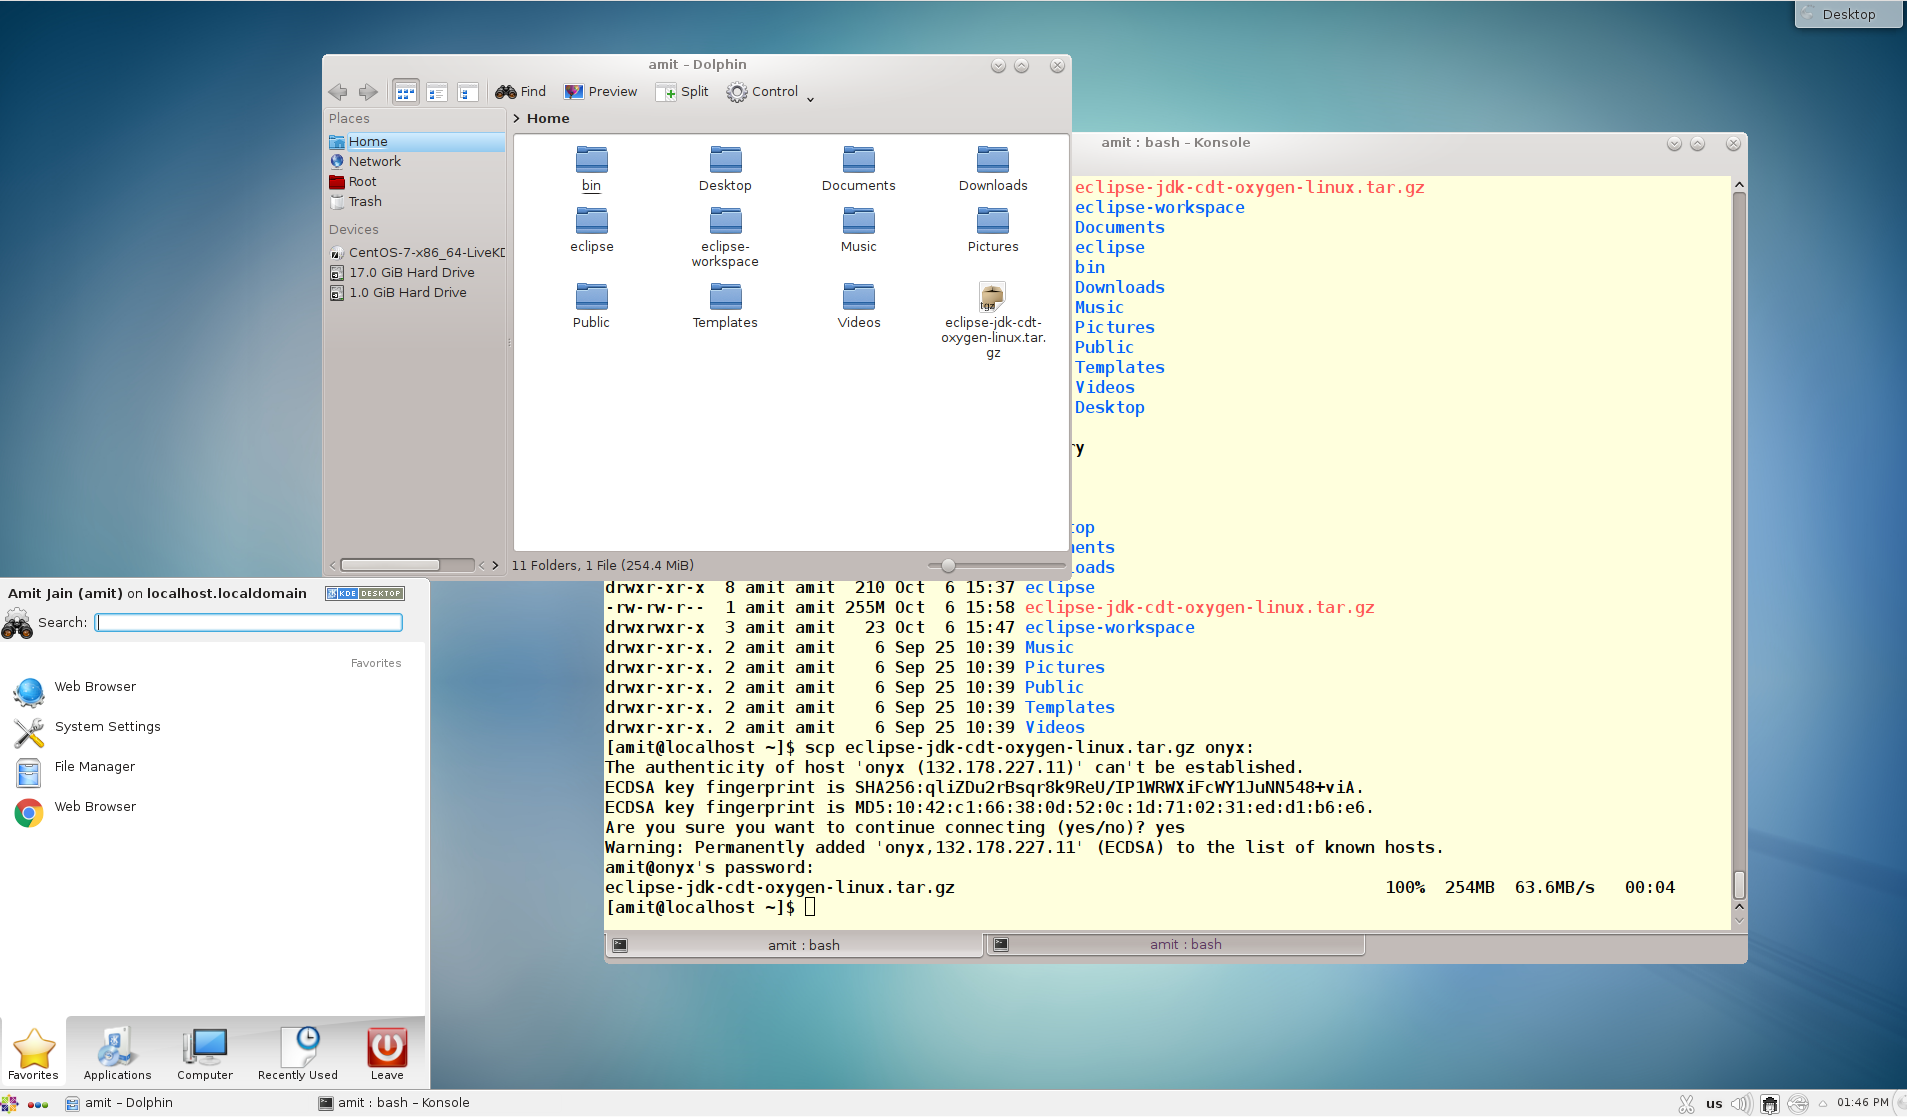 Image KDE-start-with-dolphin